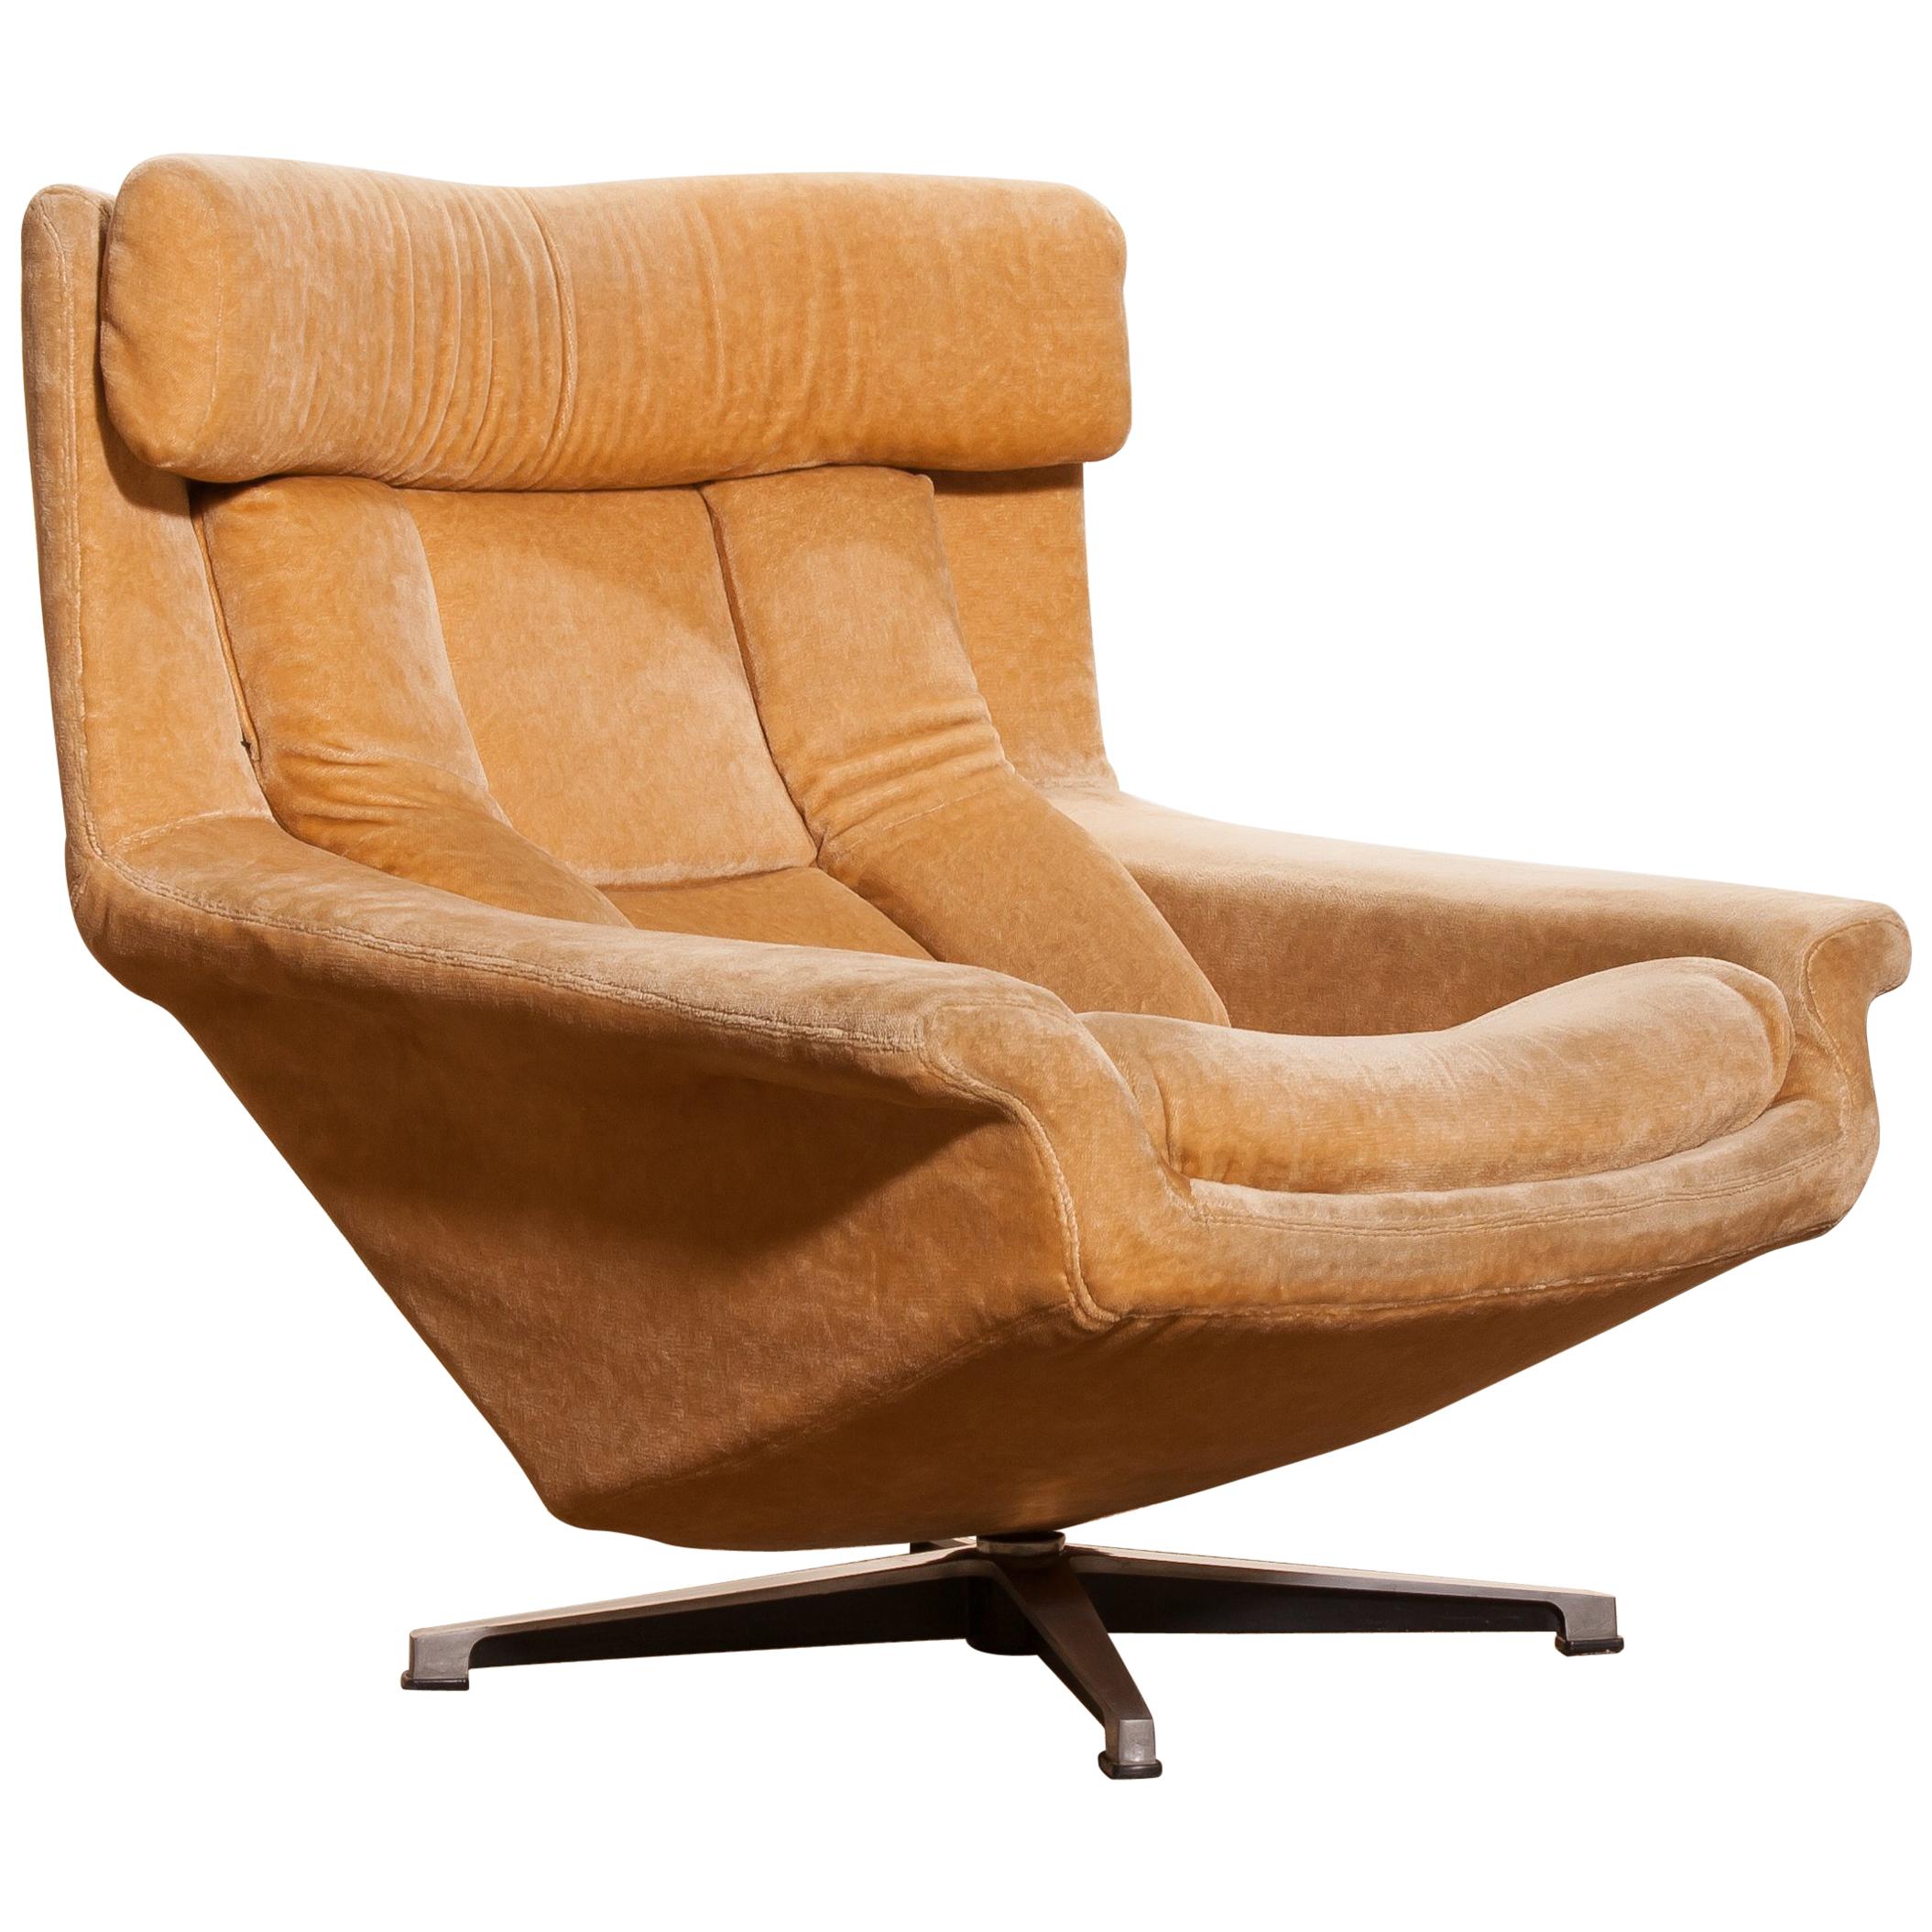 Nice, in original condition, swivel lounge chair made by Bra Bohag AB, Sweden.
The seating is upholstered with a golden or beige velvet on a chromed swivel stand.
Period 1960s.
Dimensions: H 85 cm, W 82 cm, D 80 cm, SH 38 cm.